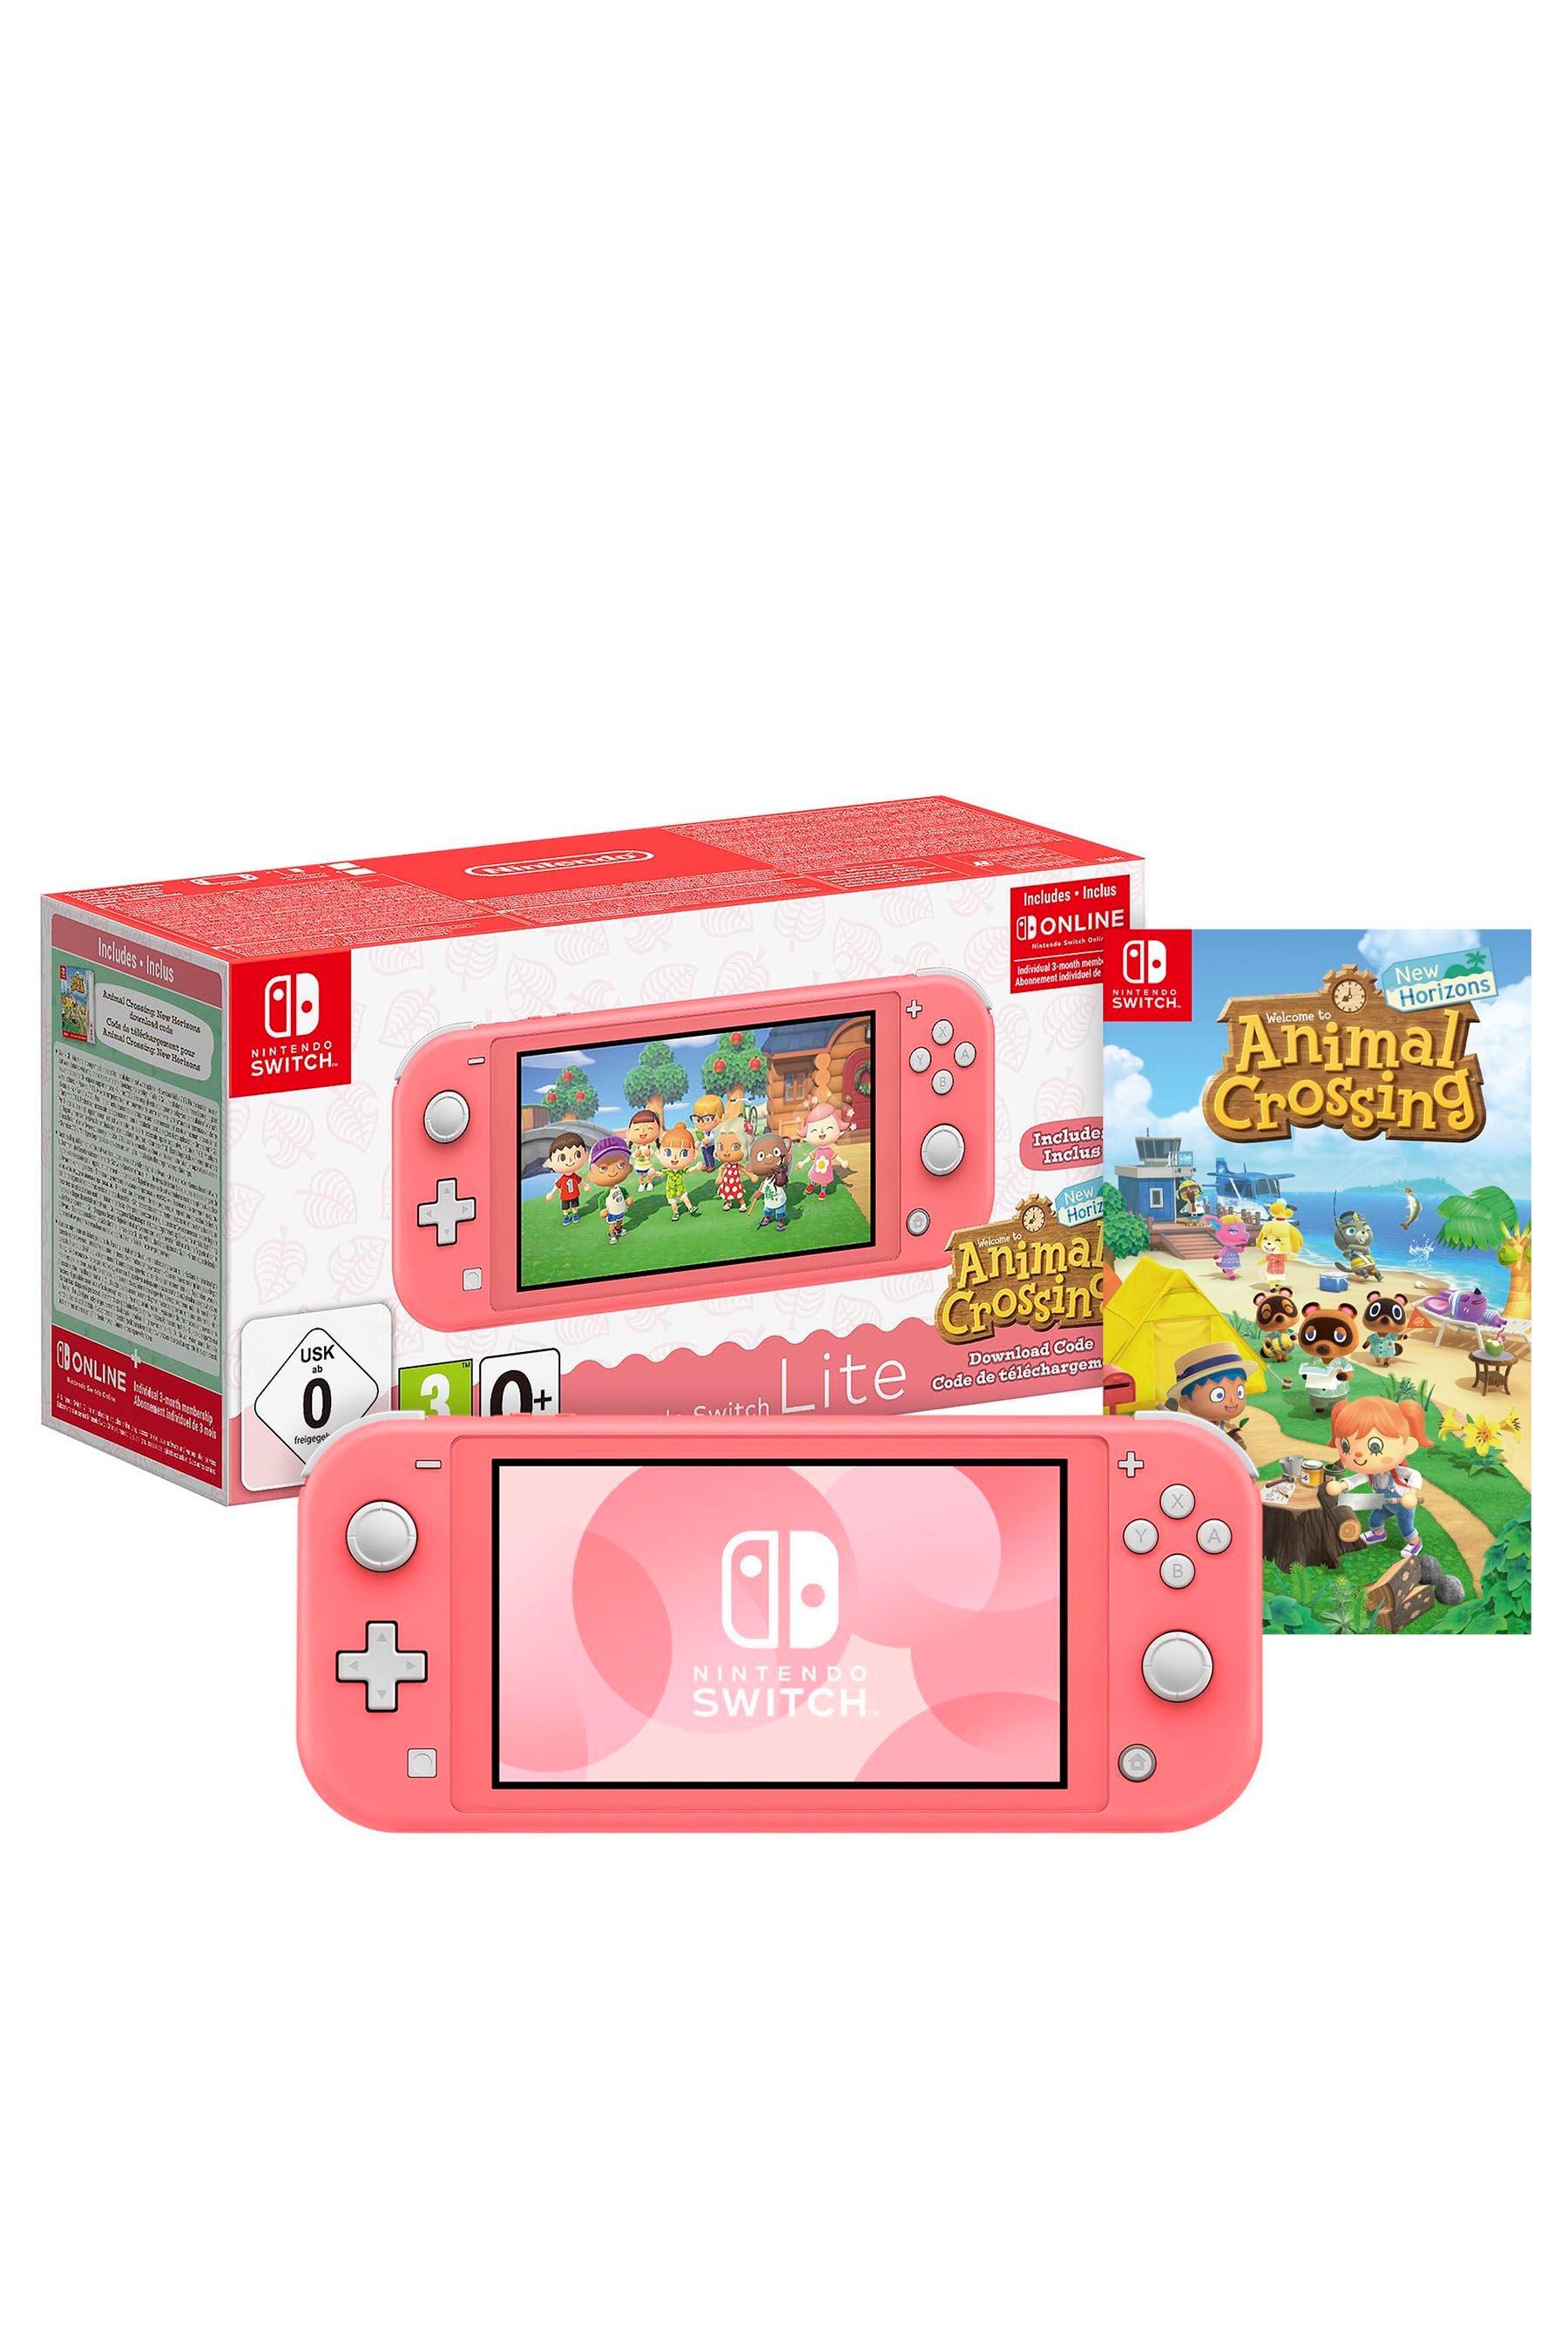 is animal crossing new horizons on switch lite